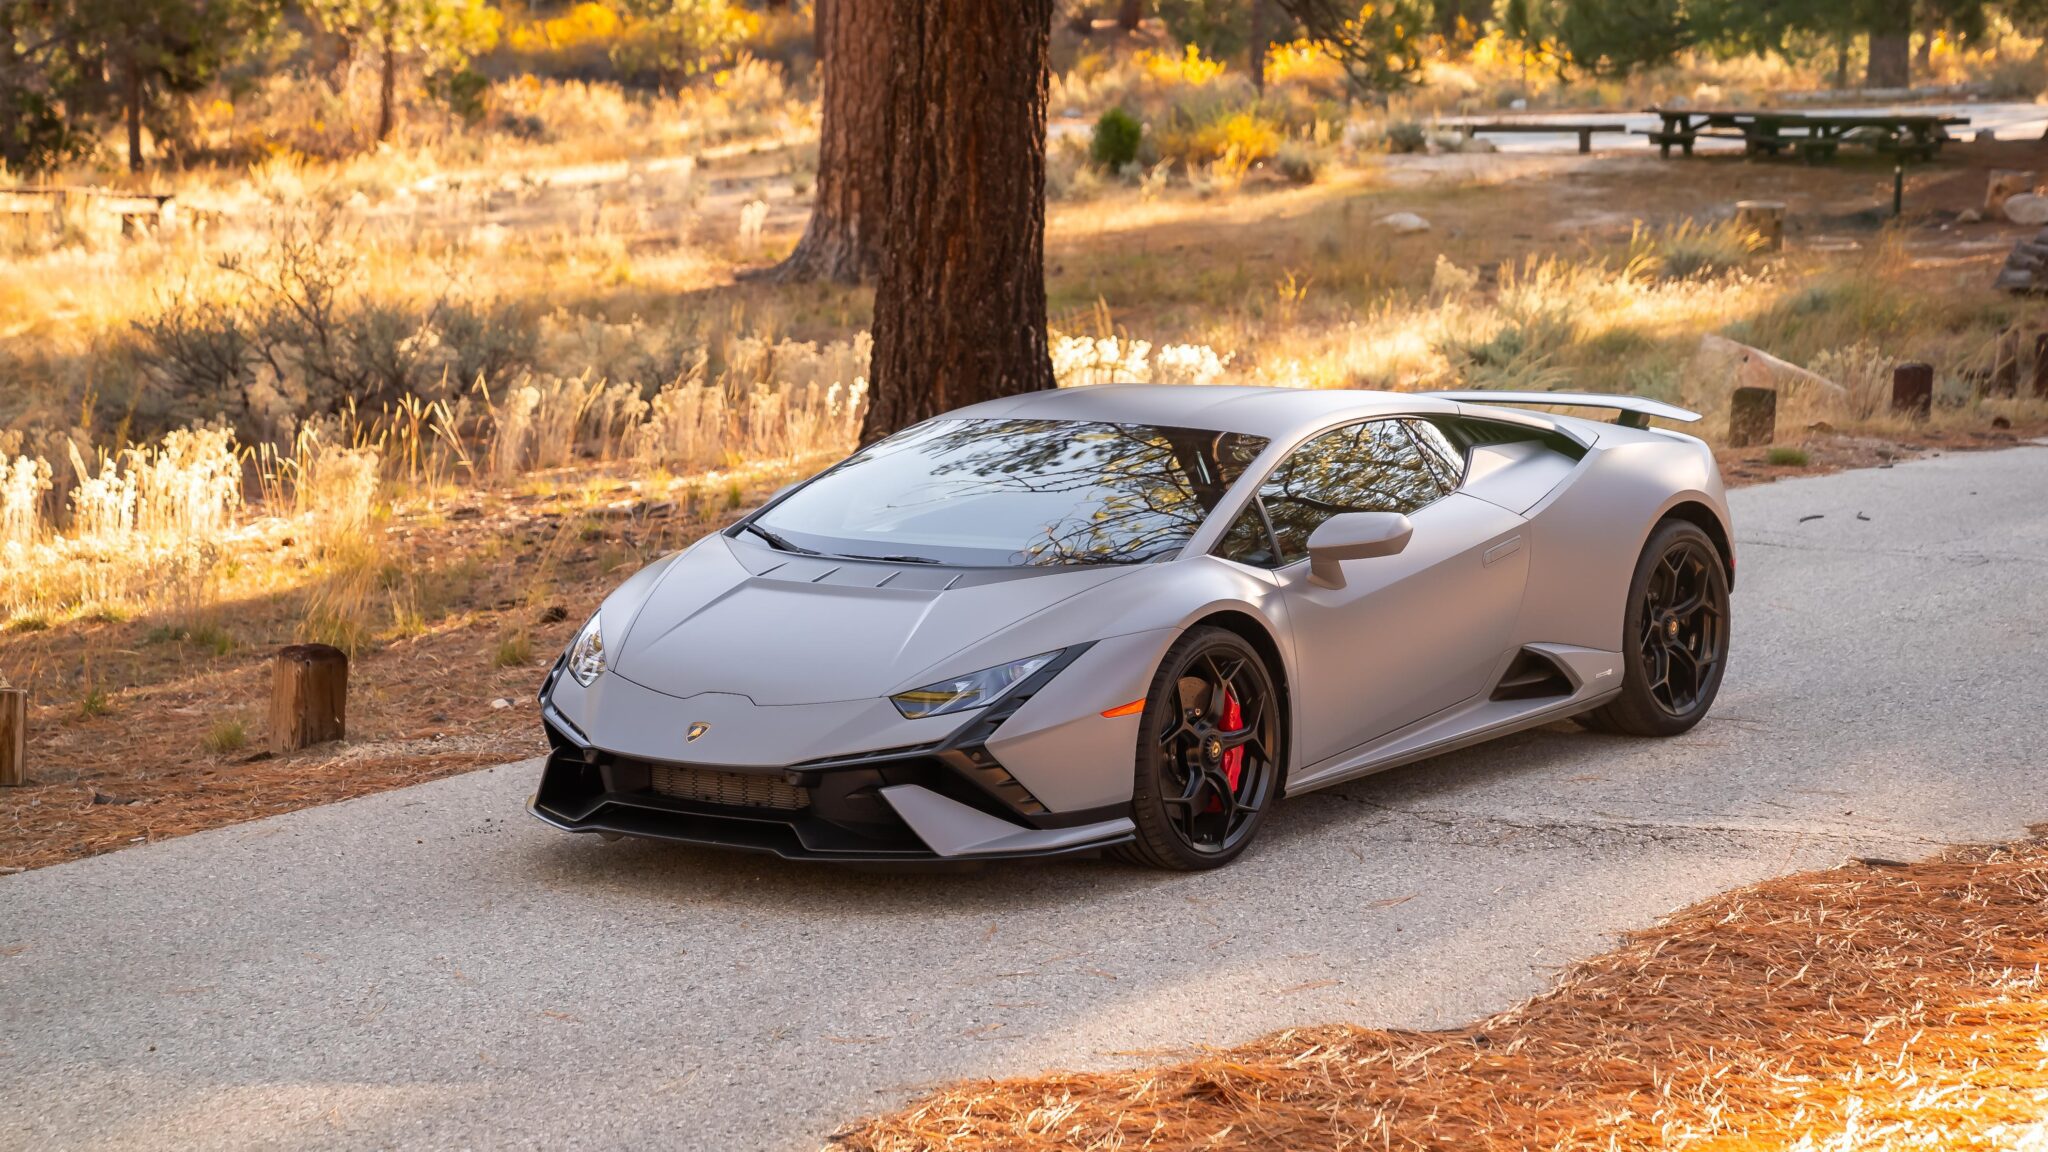 An image of a Lamborghini Huracan Tecnica parked outdoors.